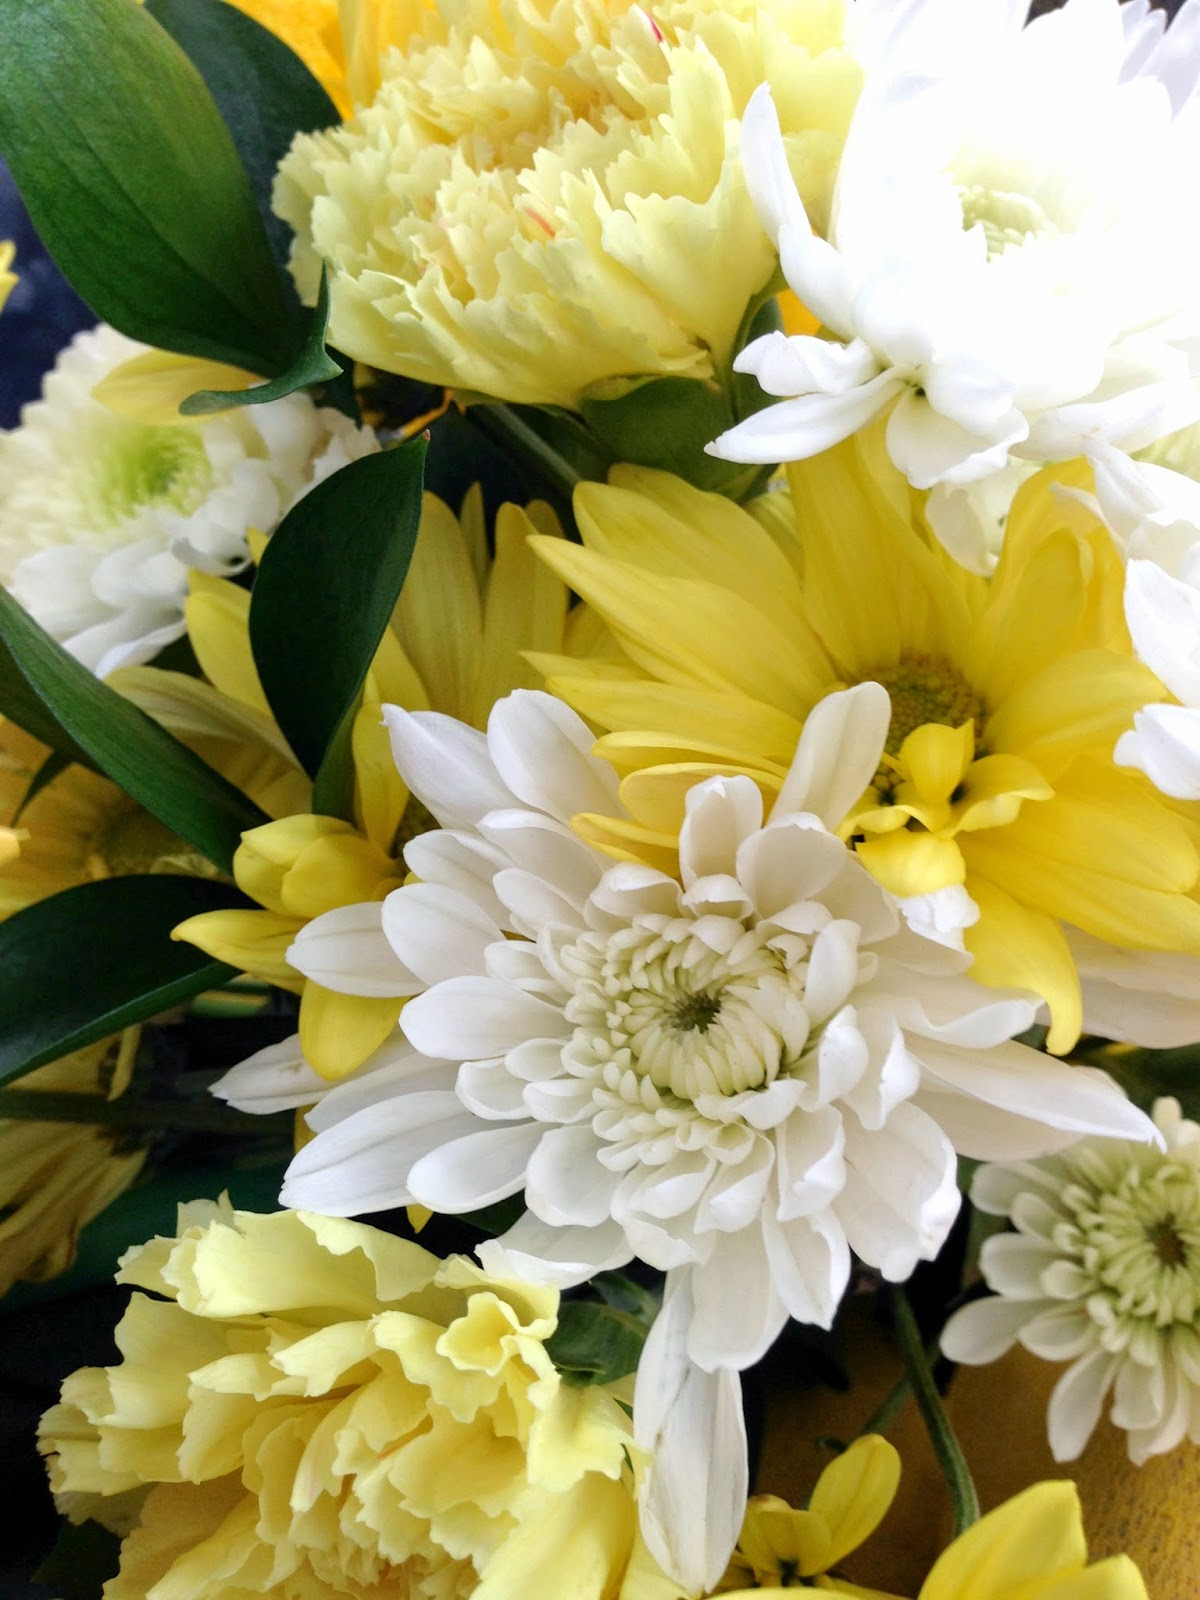 michelle paige blogs: Decorating For A Celebration of Life Memorial Service